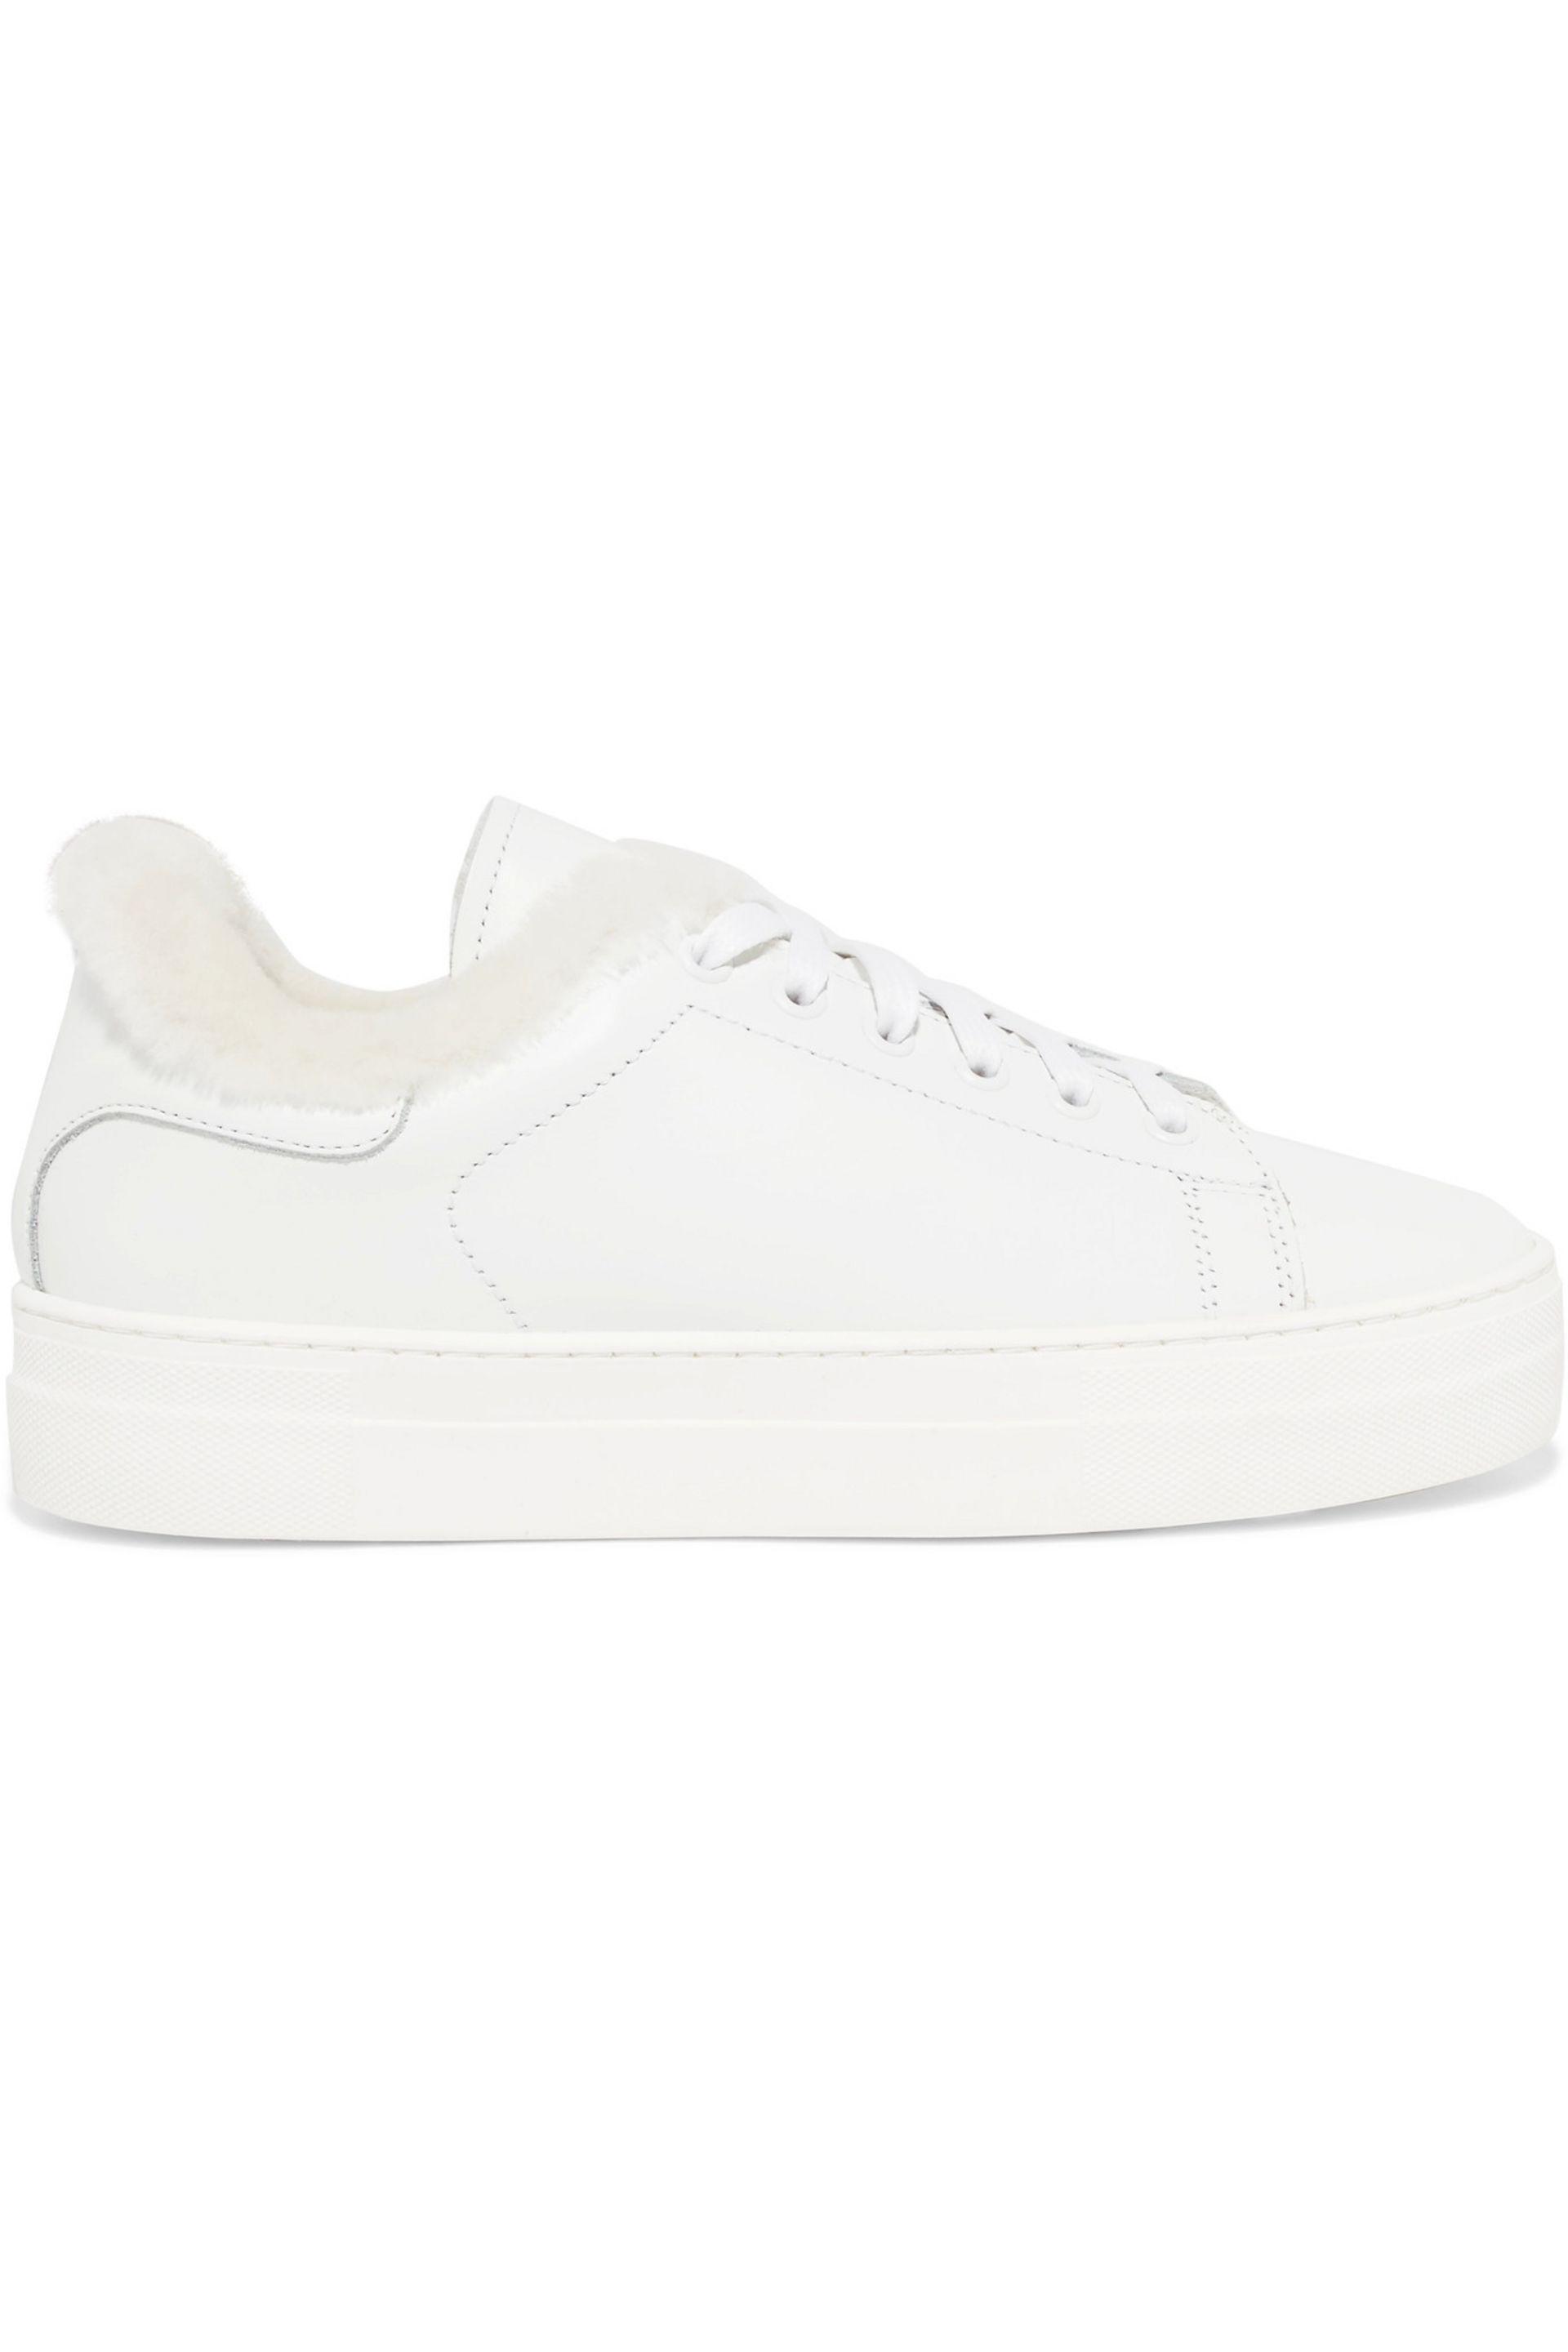 Maje Faux Fur-lined Leather Sneakers in White - Lyst